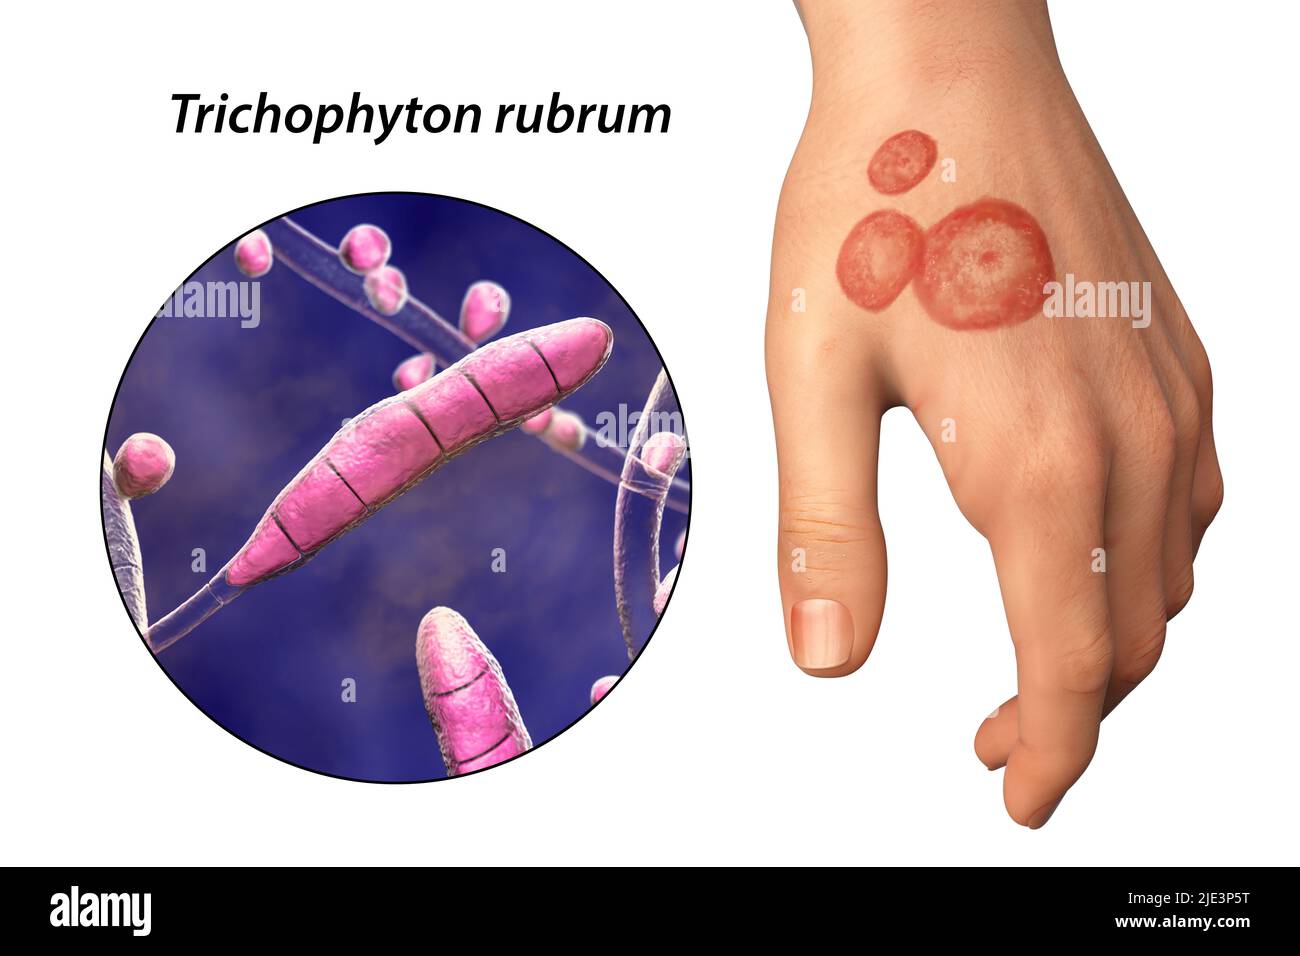 https://c8.alamy.com/comp/2JE3P5T/fungal-infection-on-a-mans-hand-illustration-known-as-ringworm-infection-or-tinea-manuum-it-can-be-caused-by-various-fungi-including-trichophyton-rubrum-it-causes-severe-itching-the-disease-is-highly-contagious-and-can-be-spread-by-direct-contact-or-by-contact-with-contaminated-material-treatment-is-with-antifungal-drugs-2JE3P5T.jpg